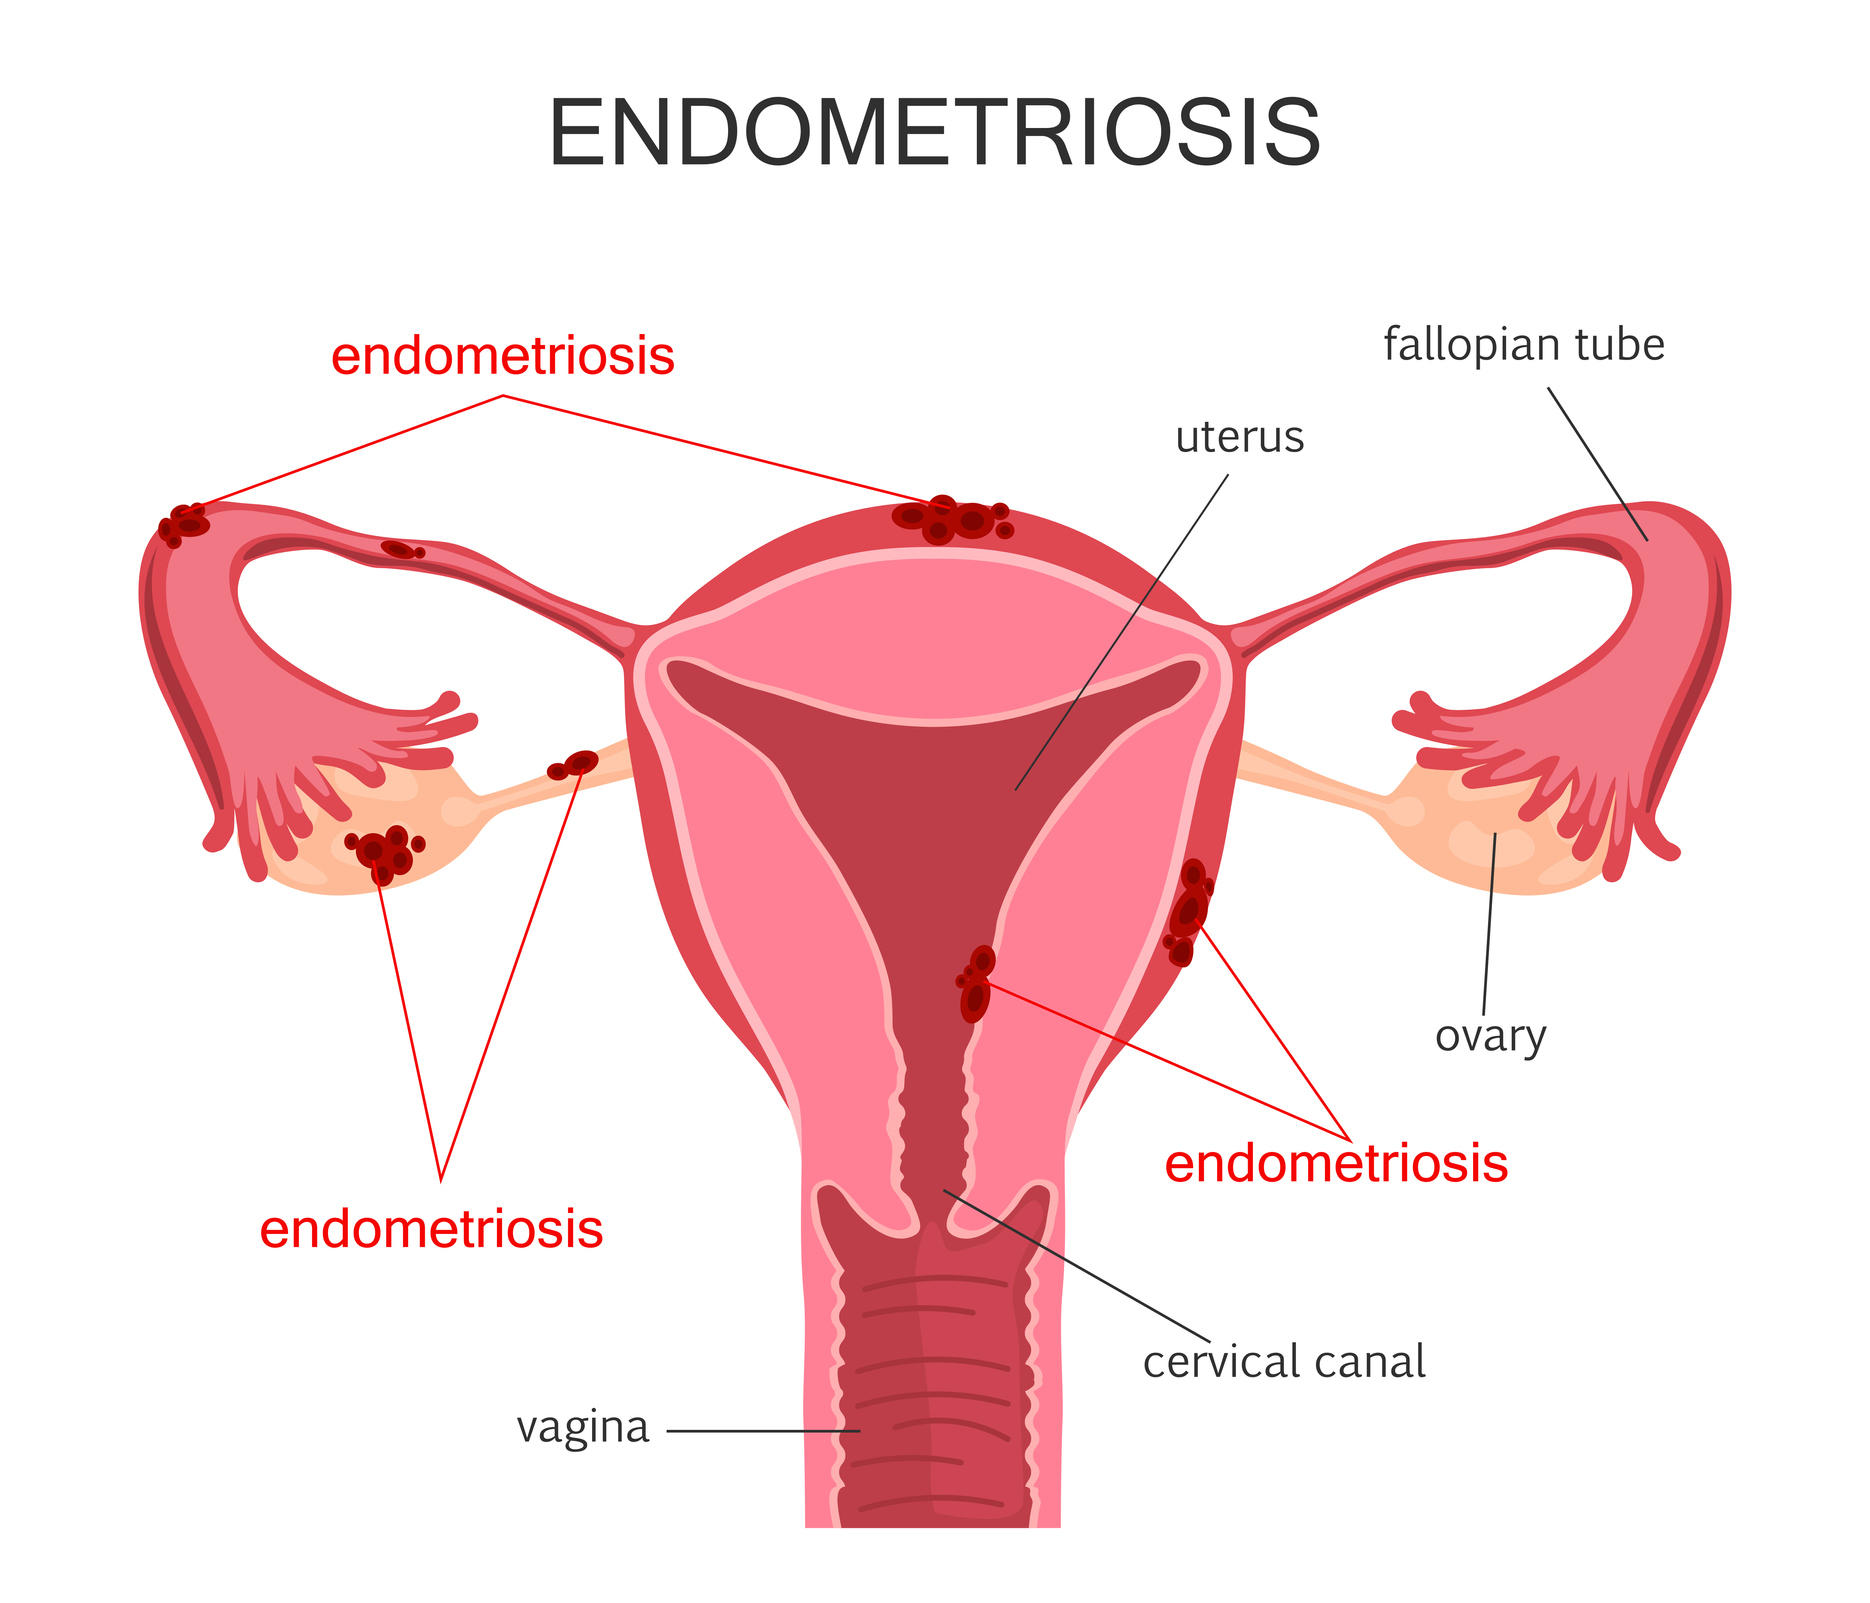 The link between endometriosis and an infectious bacterium_50.1